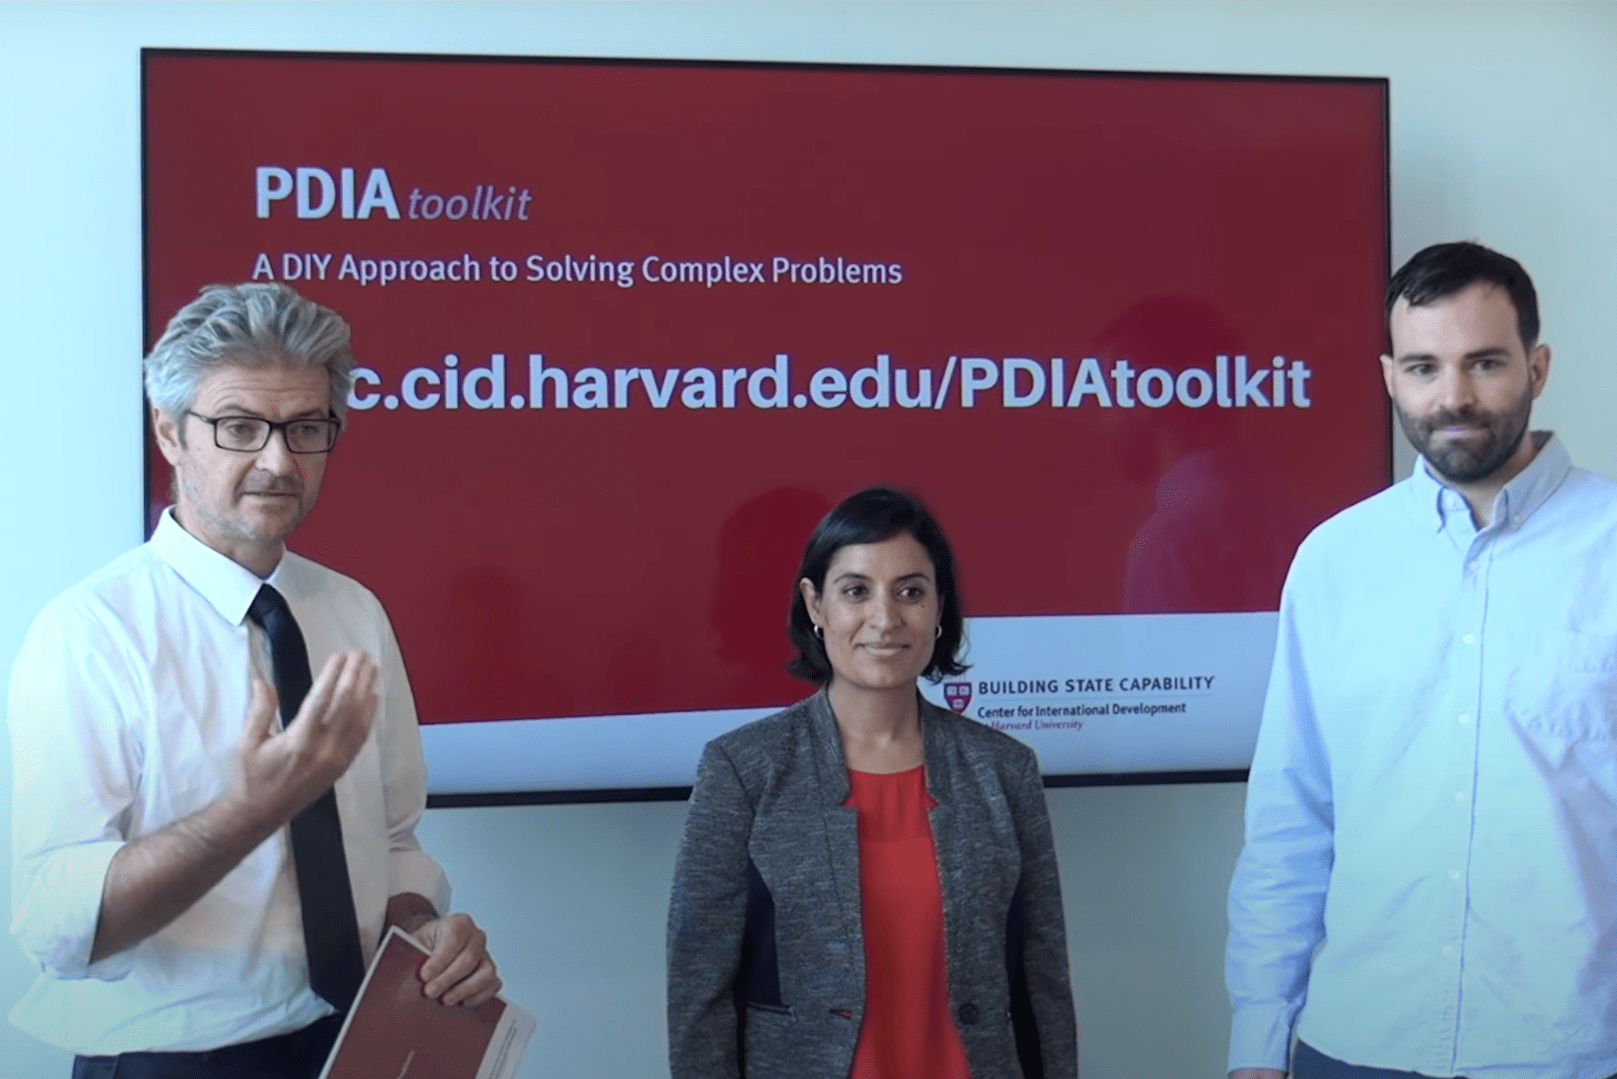 Matt Andrews, Salimah Samji, and Tim McNaught presenting the new PDIA toolkit with slide of toolkit behind them